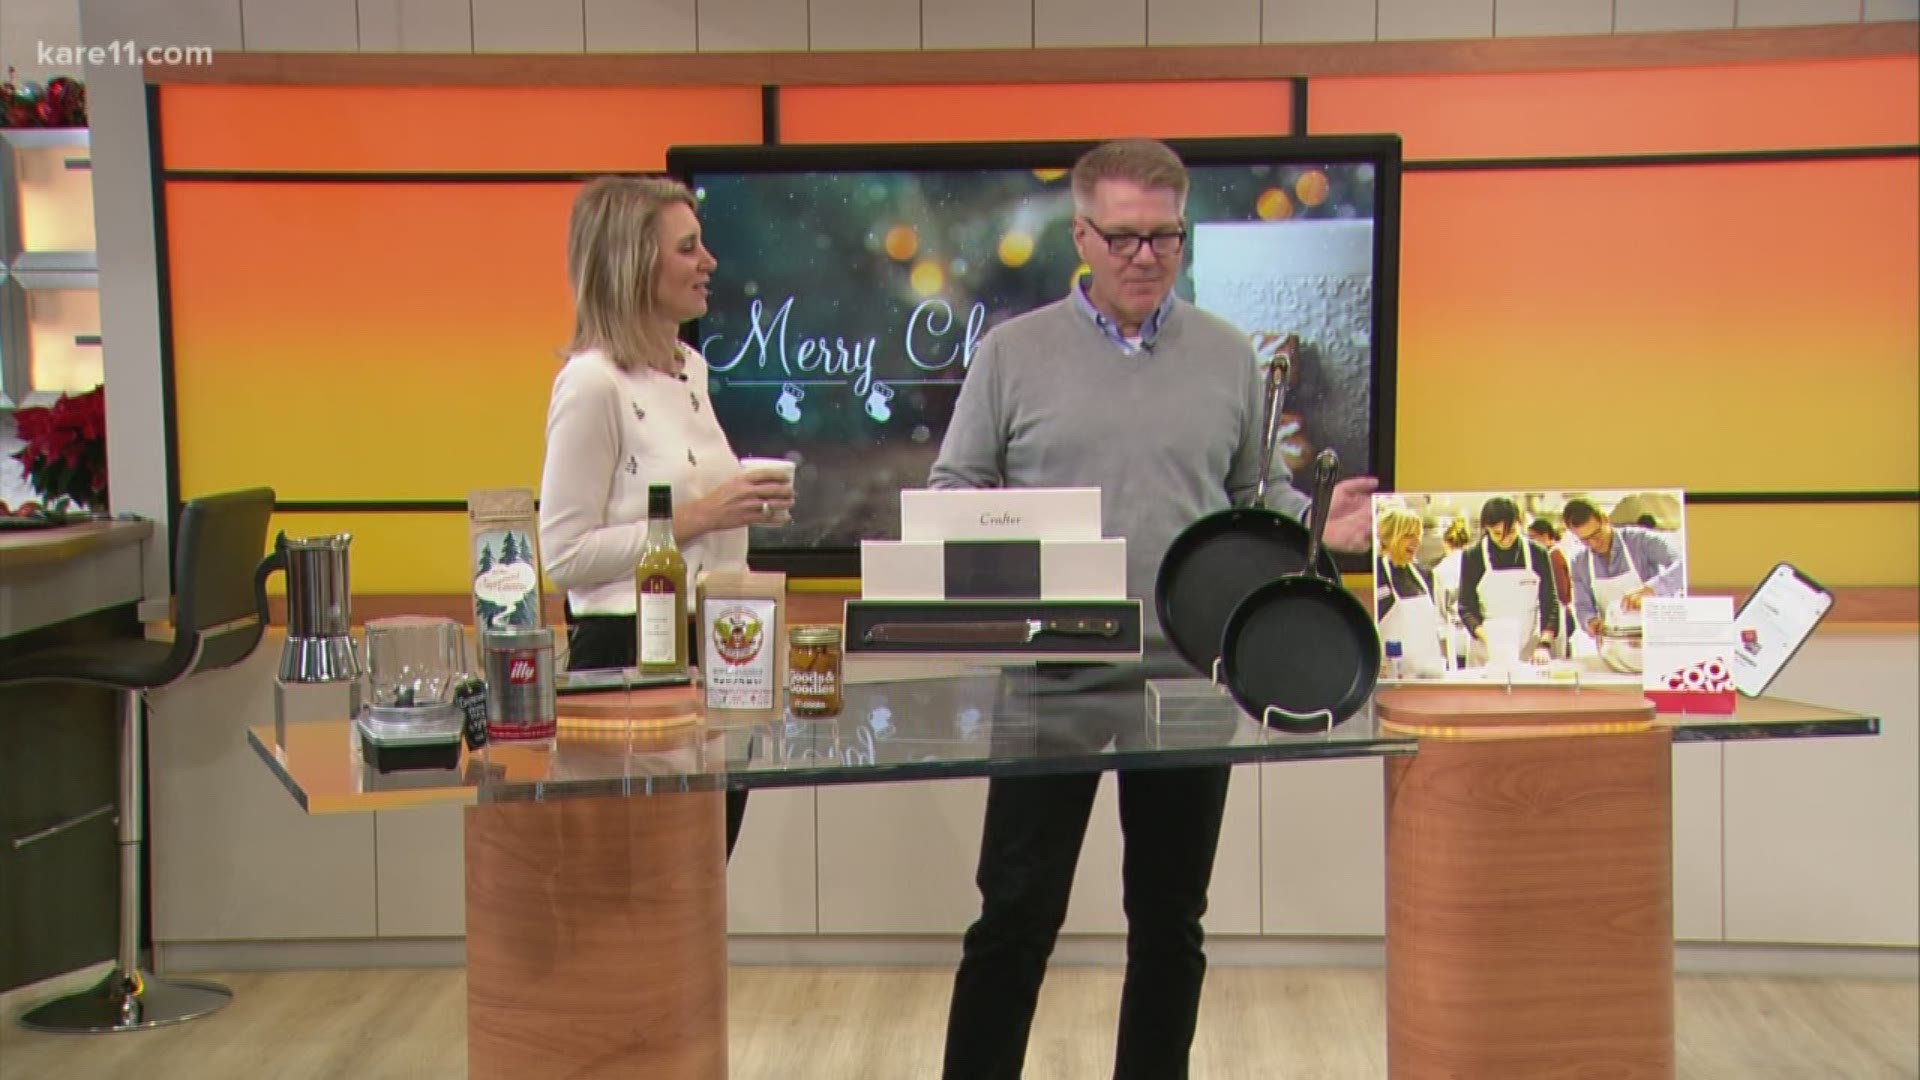 Karl Benson from Cooks of Crocus Hill stopped by to share some gift ideas for the amateur gourmet...or just anyone who likes to cook.